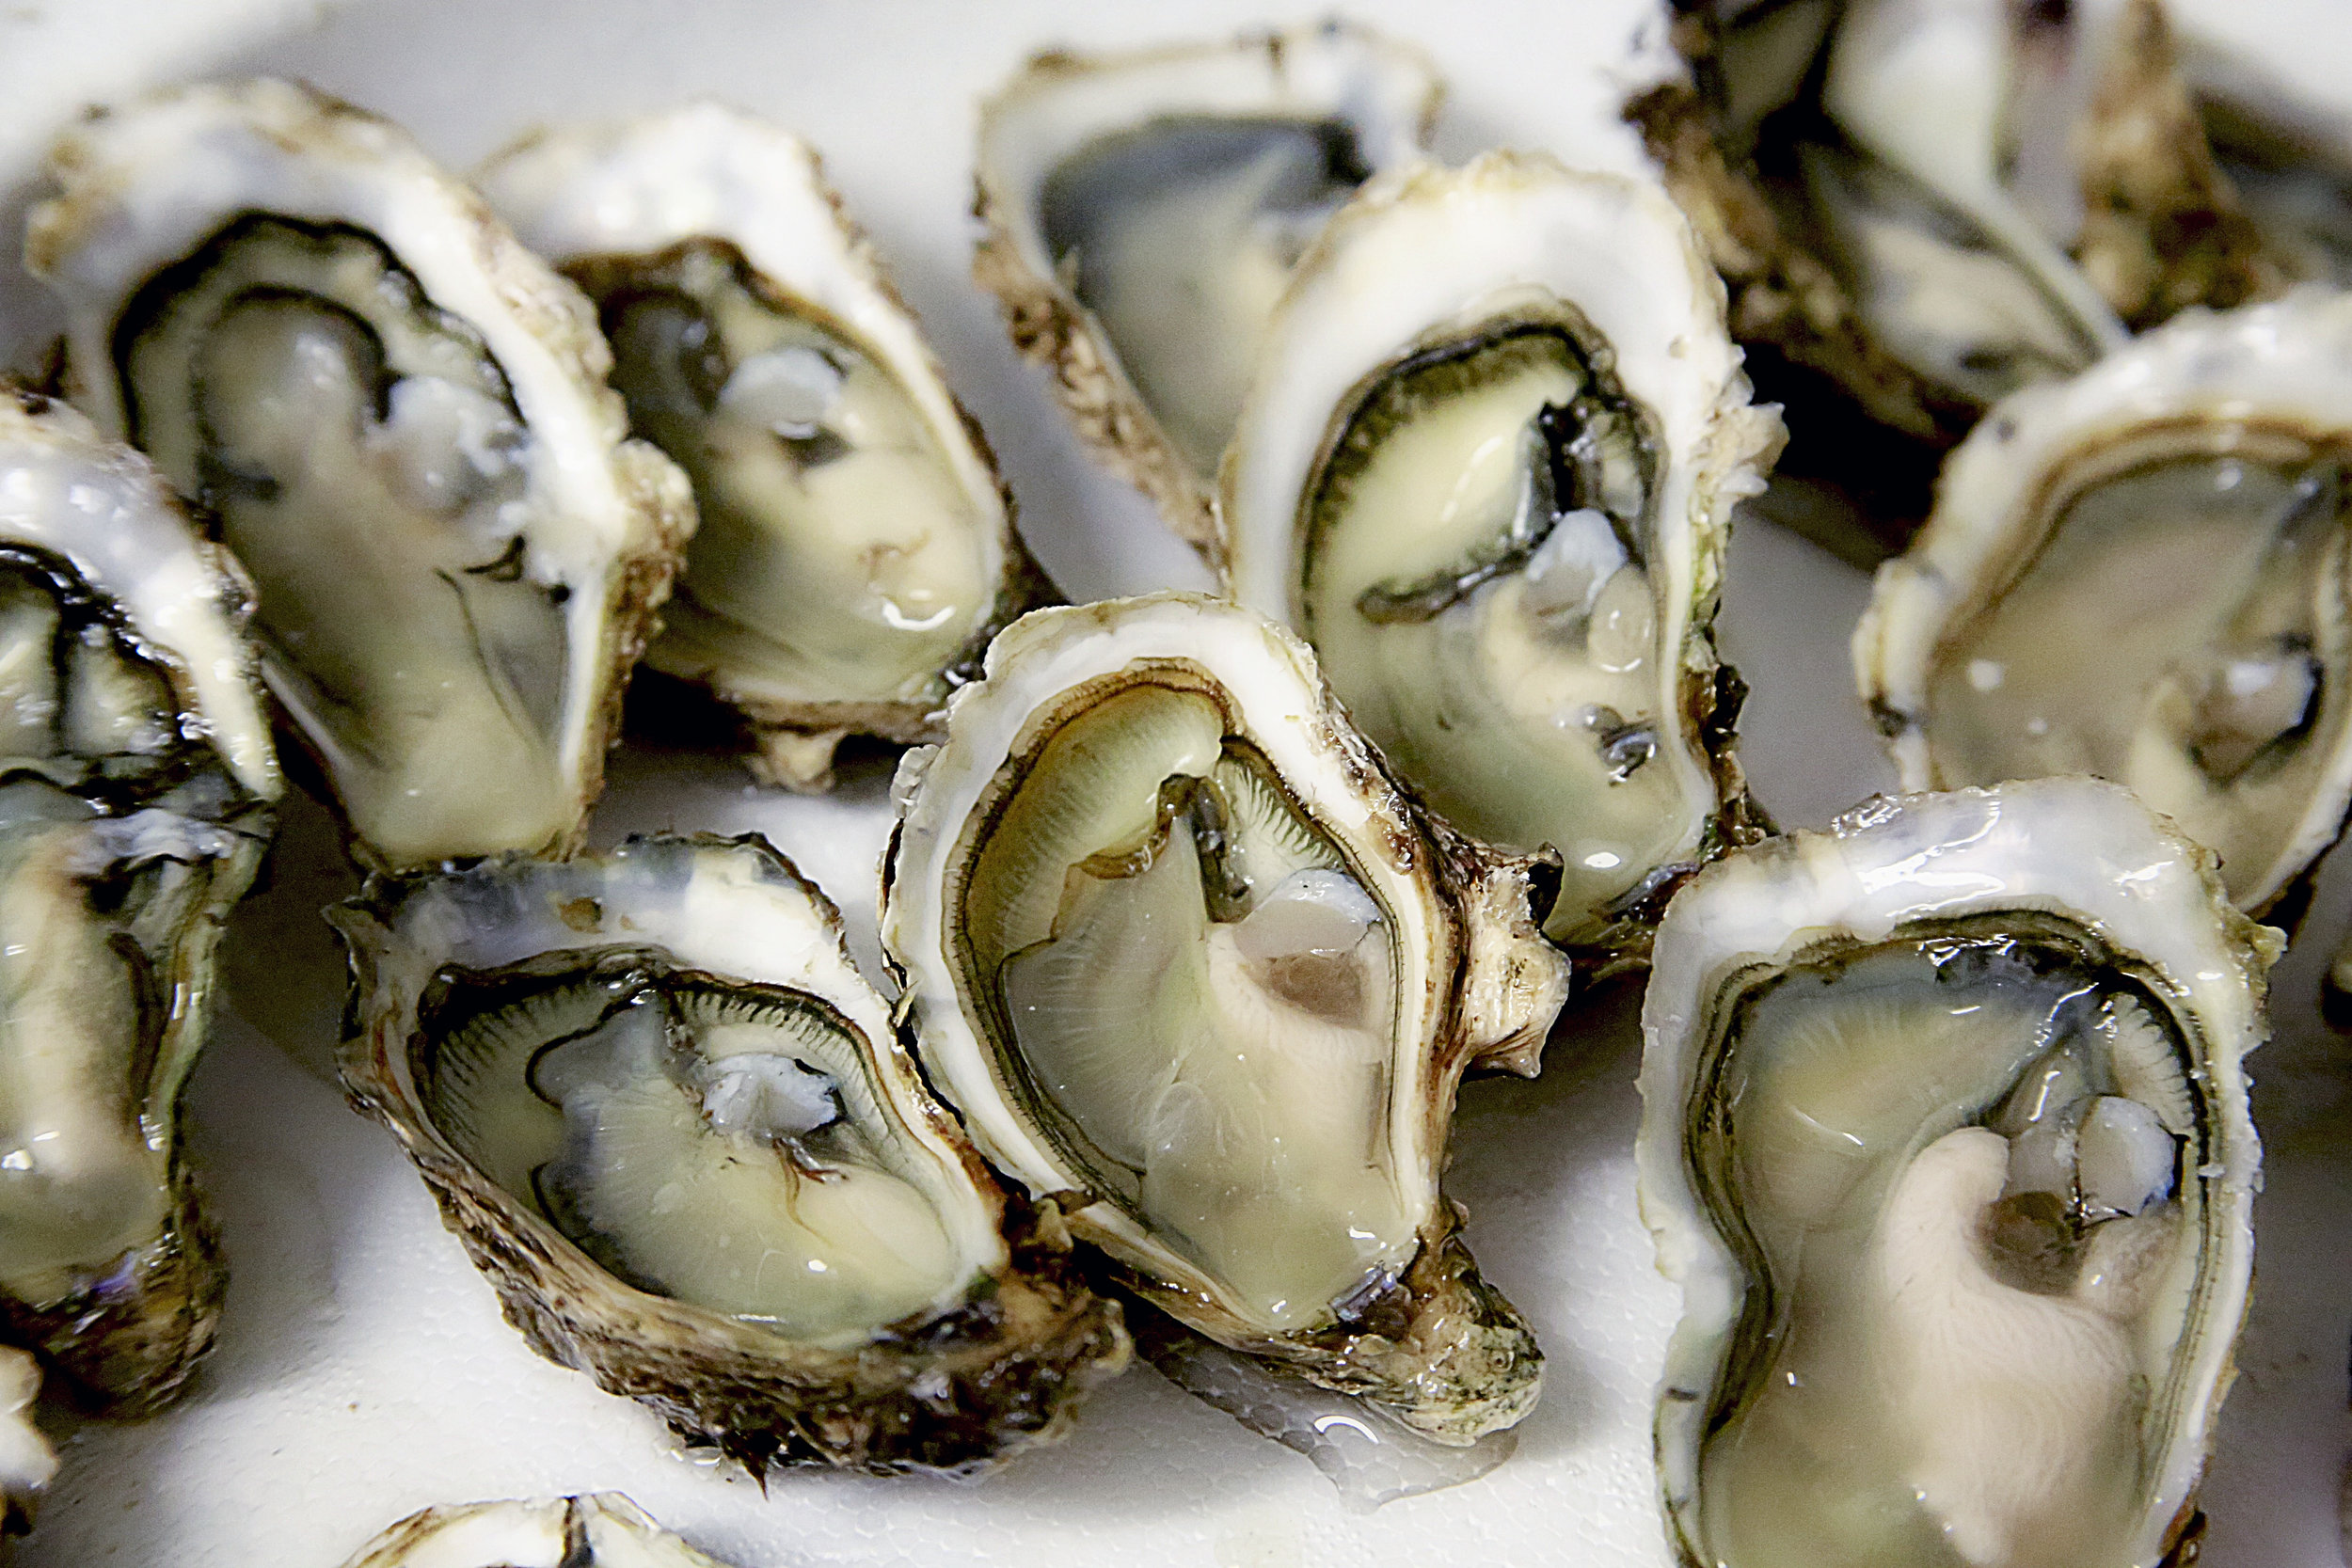 Canva - Oyster, Shell, Seafood, Crustaceans.jpg